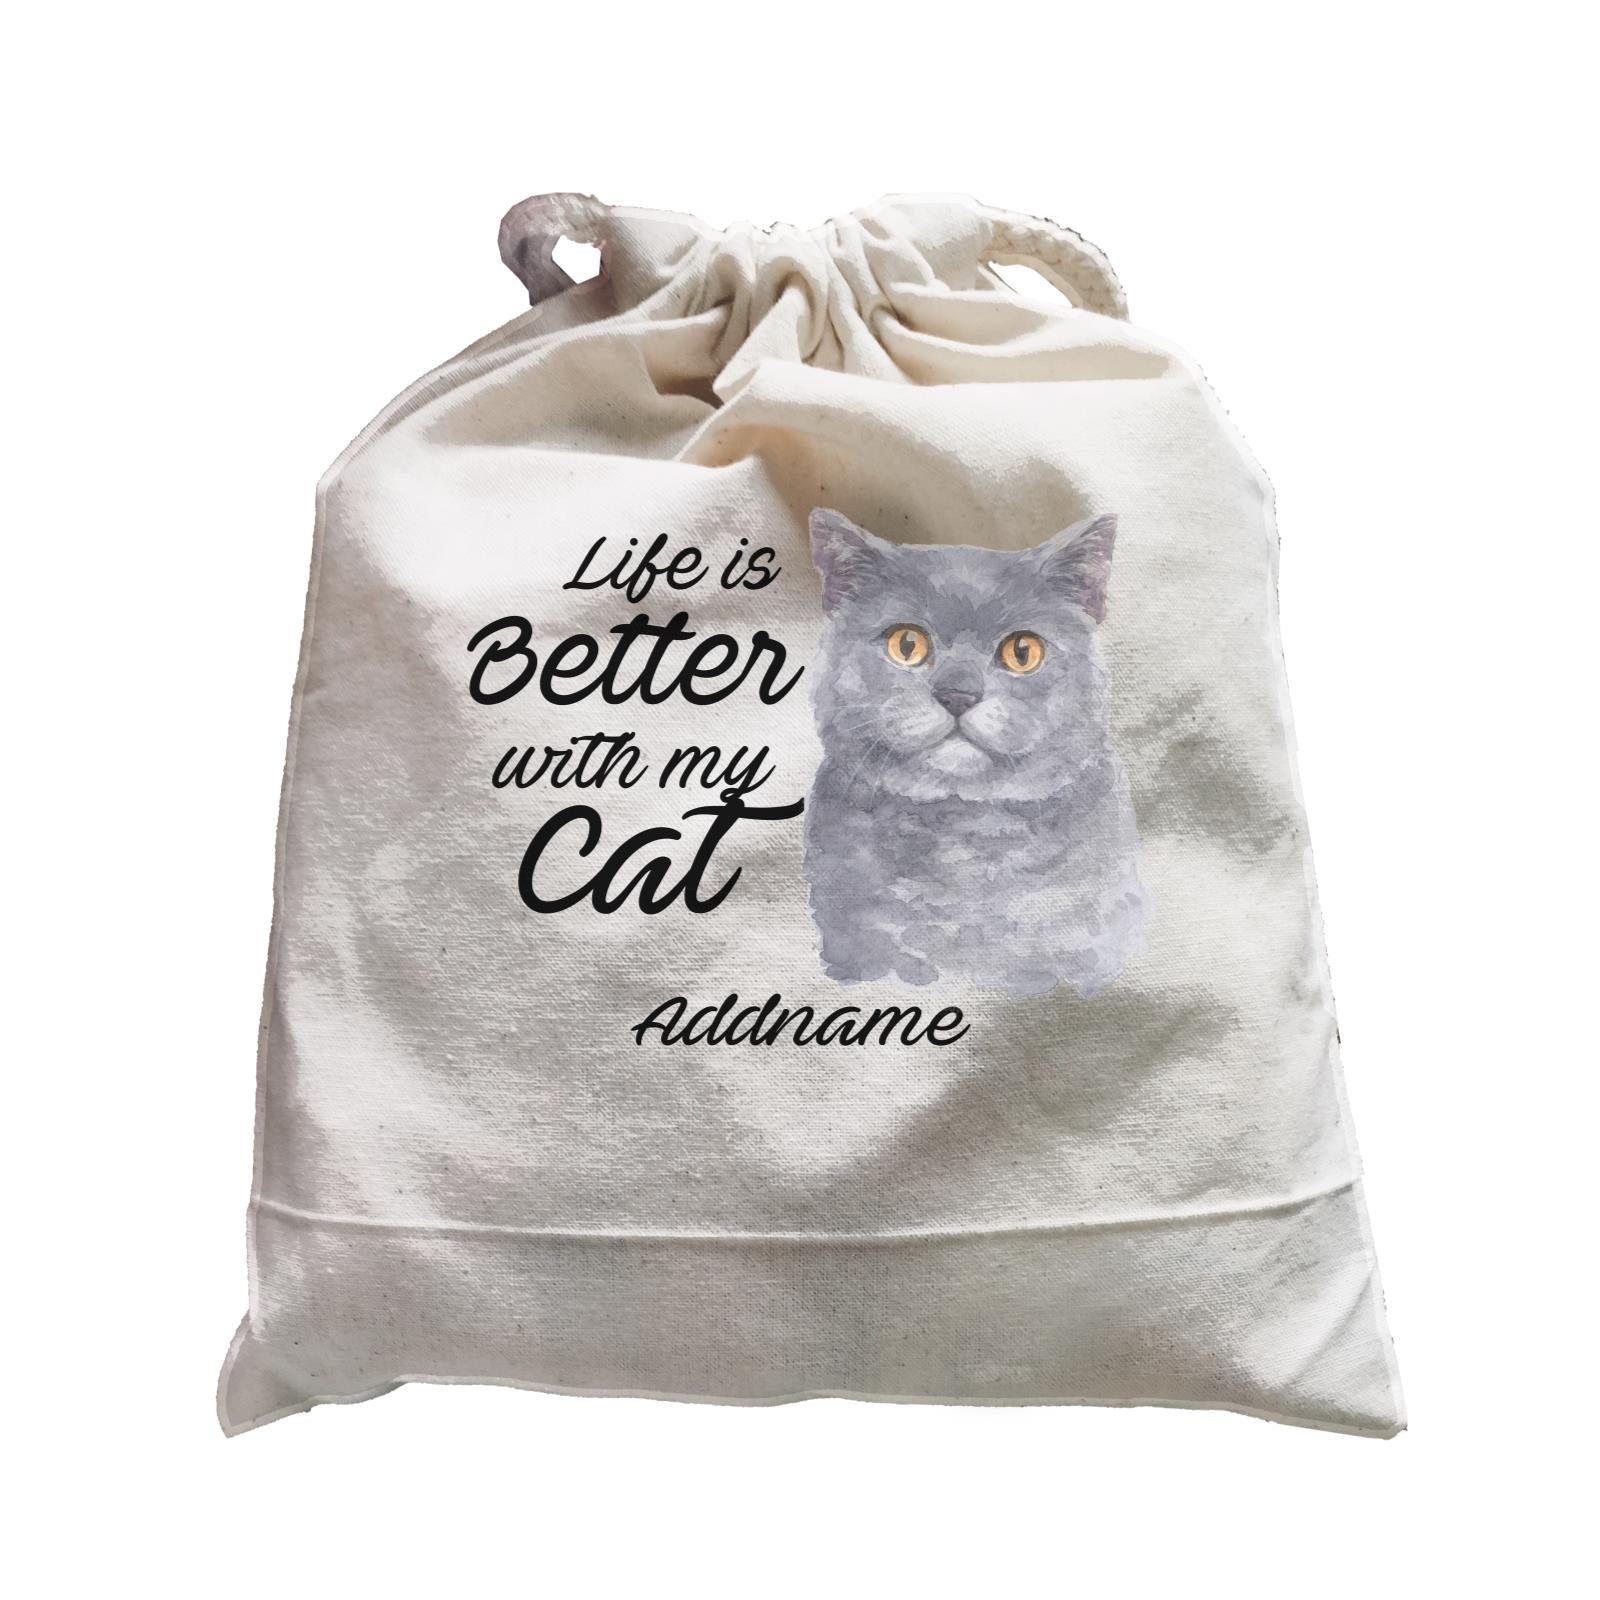 Watercolor Life is Better With My Cat British Shorthair Grey Addname Satchel